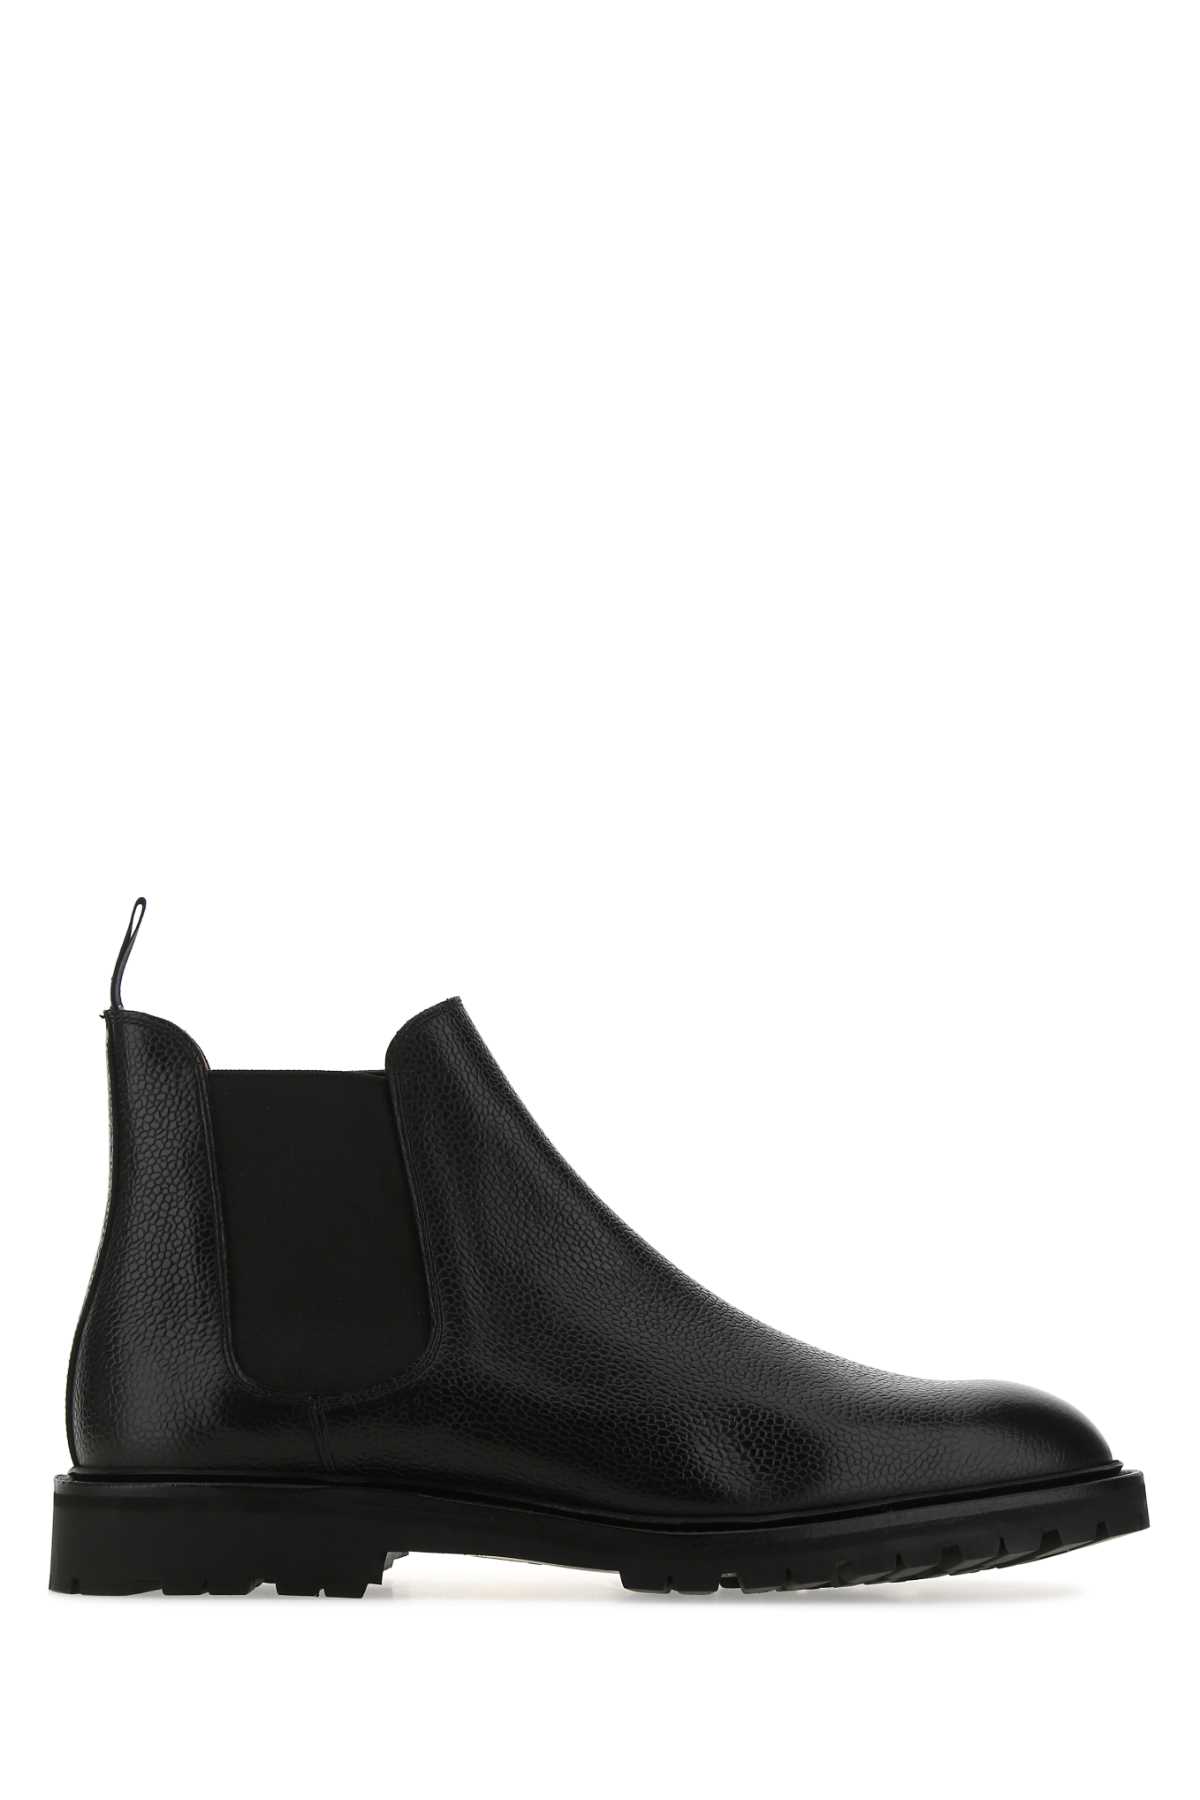 Black Leather Chelsea 11 Ankle Boots